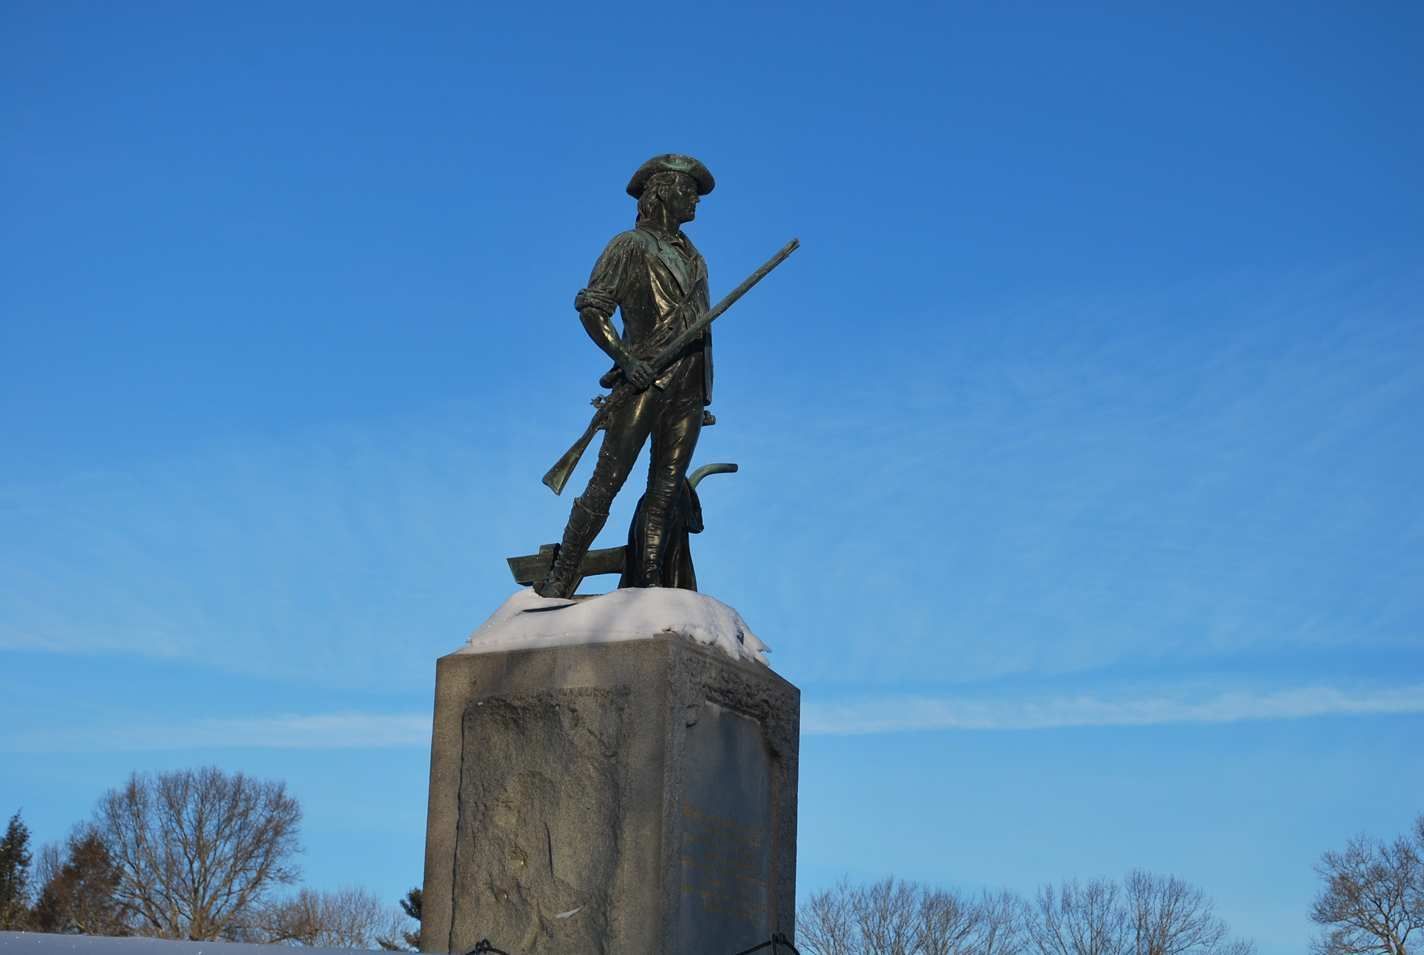 The embattled farmer stands guard over North Bridge, Concord.